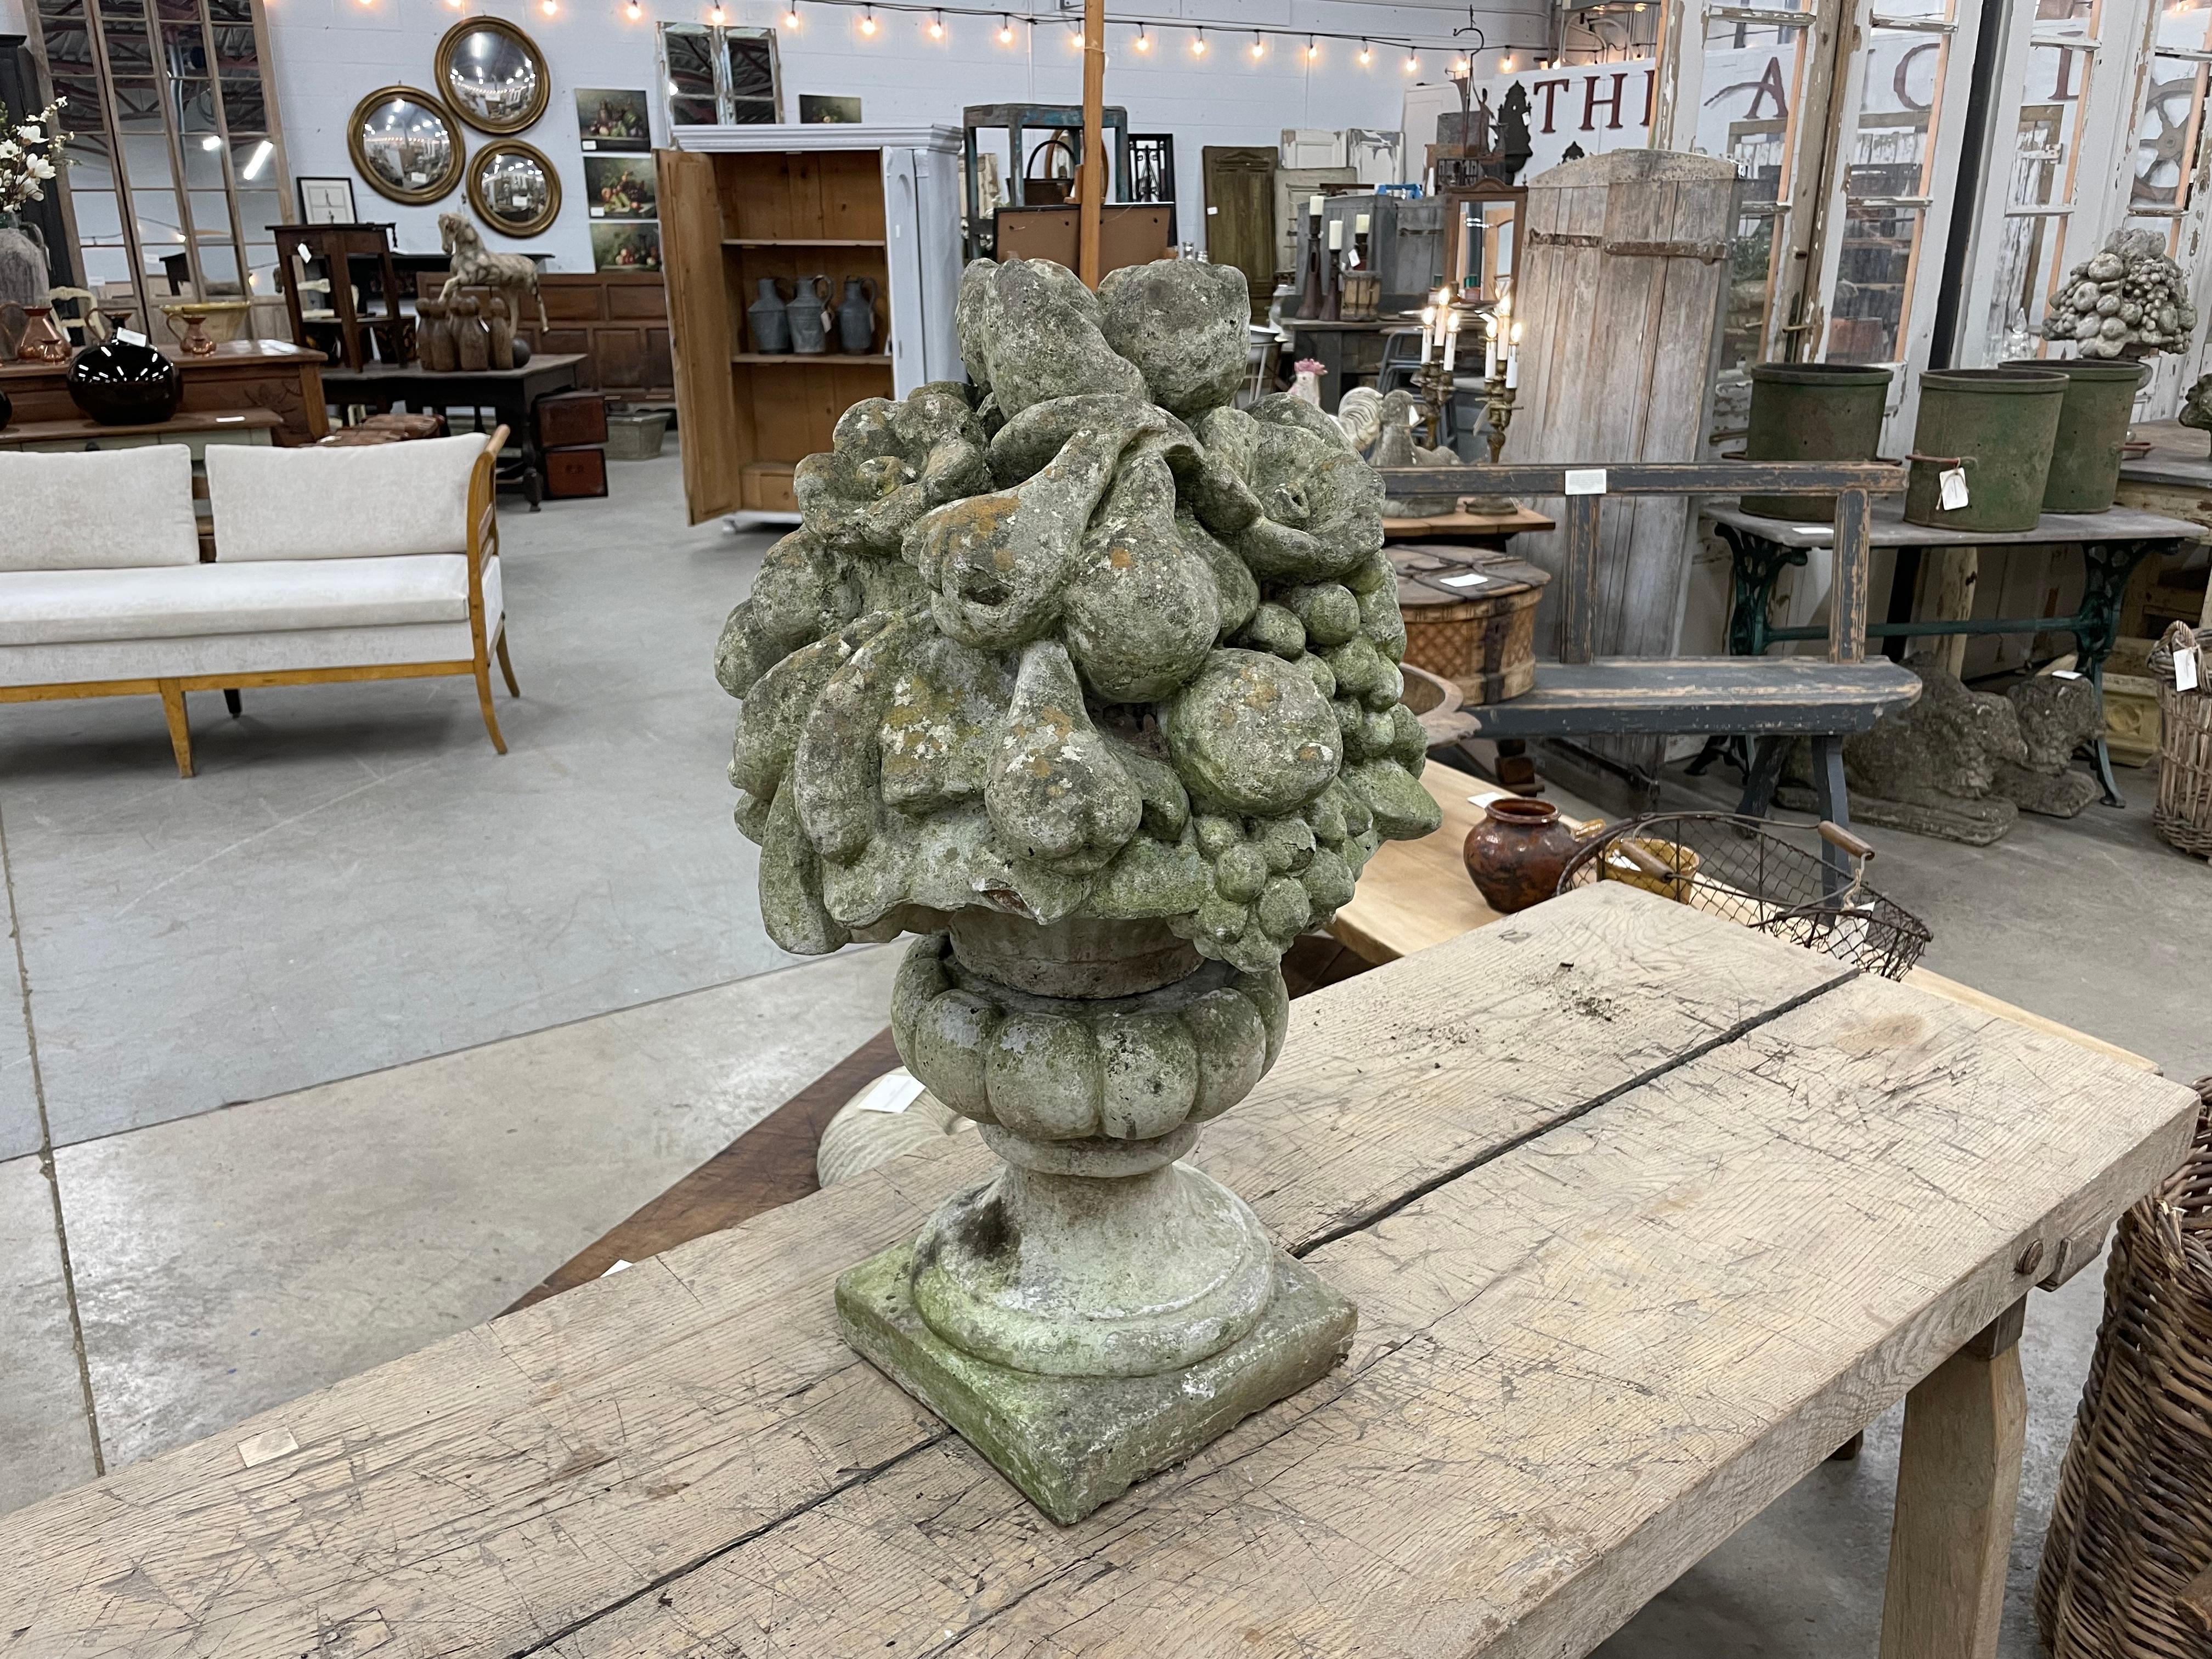 Antique cast stone fruit urns have a rich history and cultural significance. Historically, these urns decorated gardens, estates, and interior spaces. They originated in ancient civilizations, such as Greece and Rome, where they were often crafted